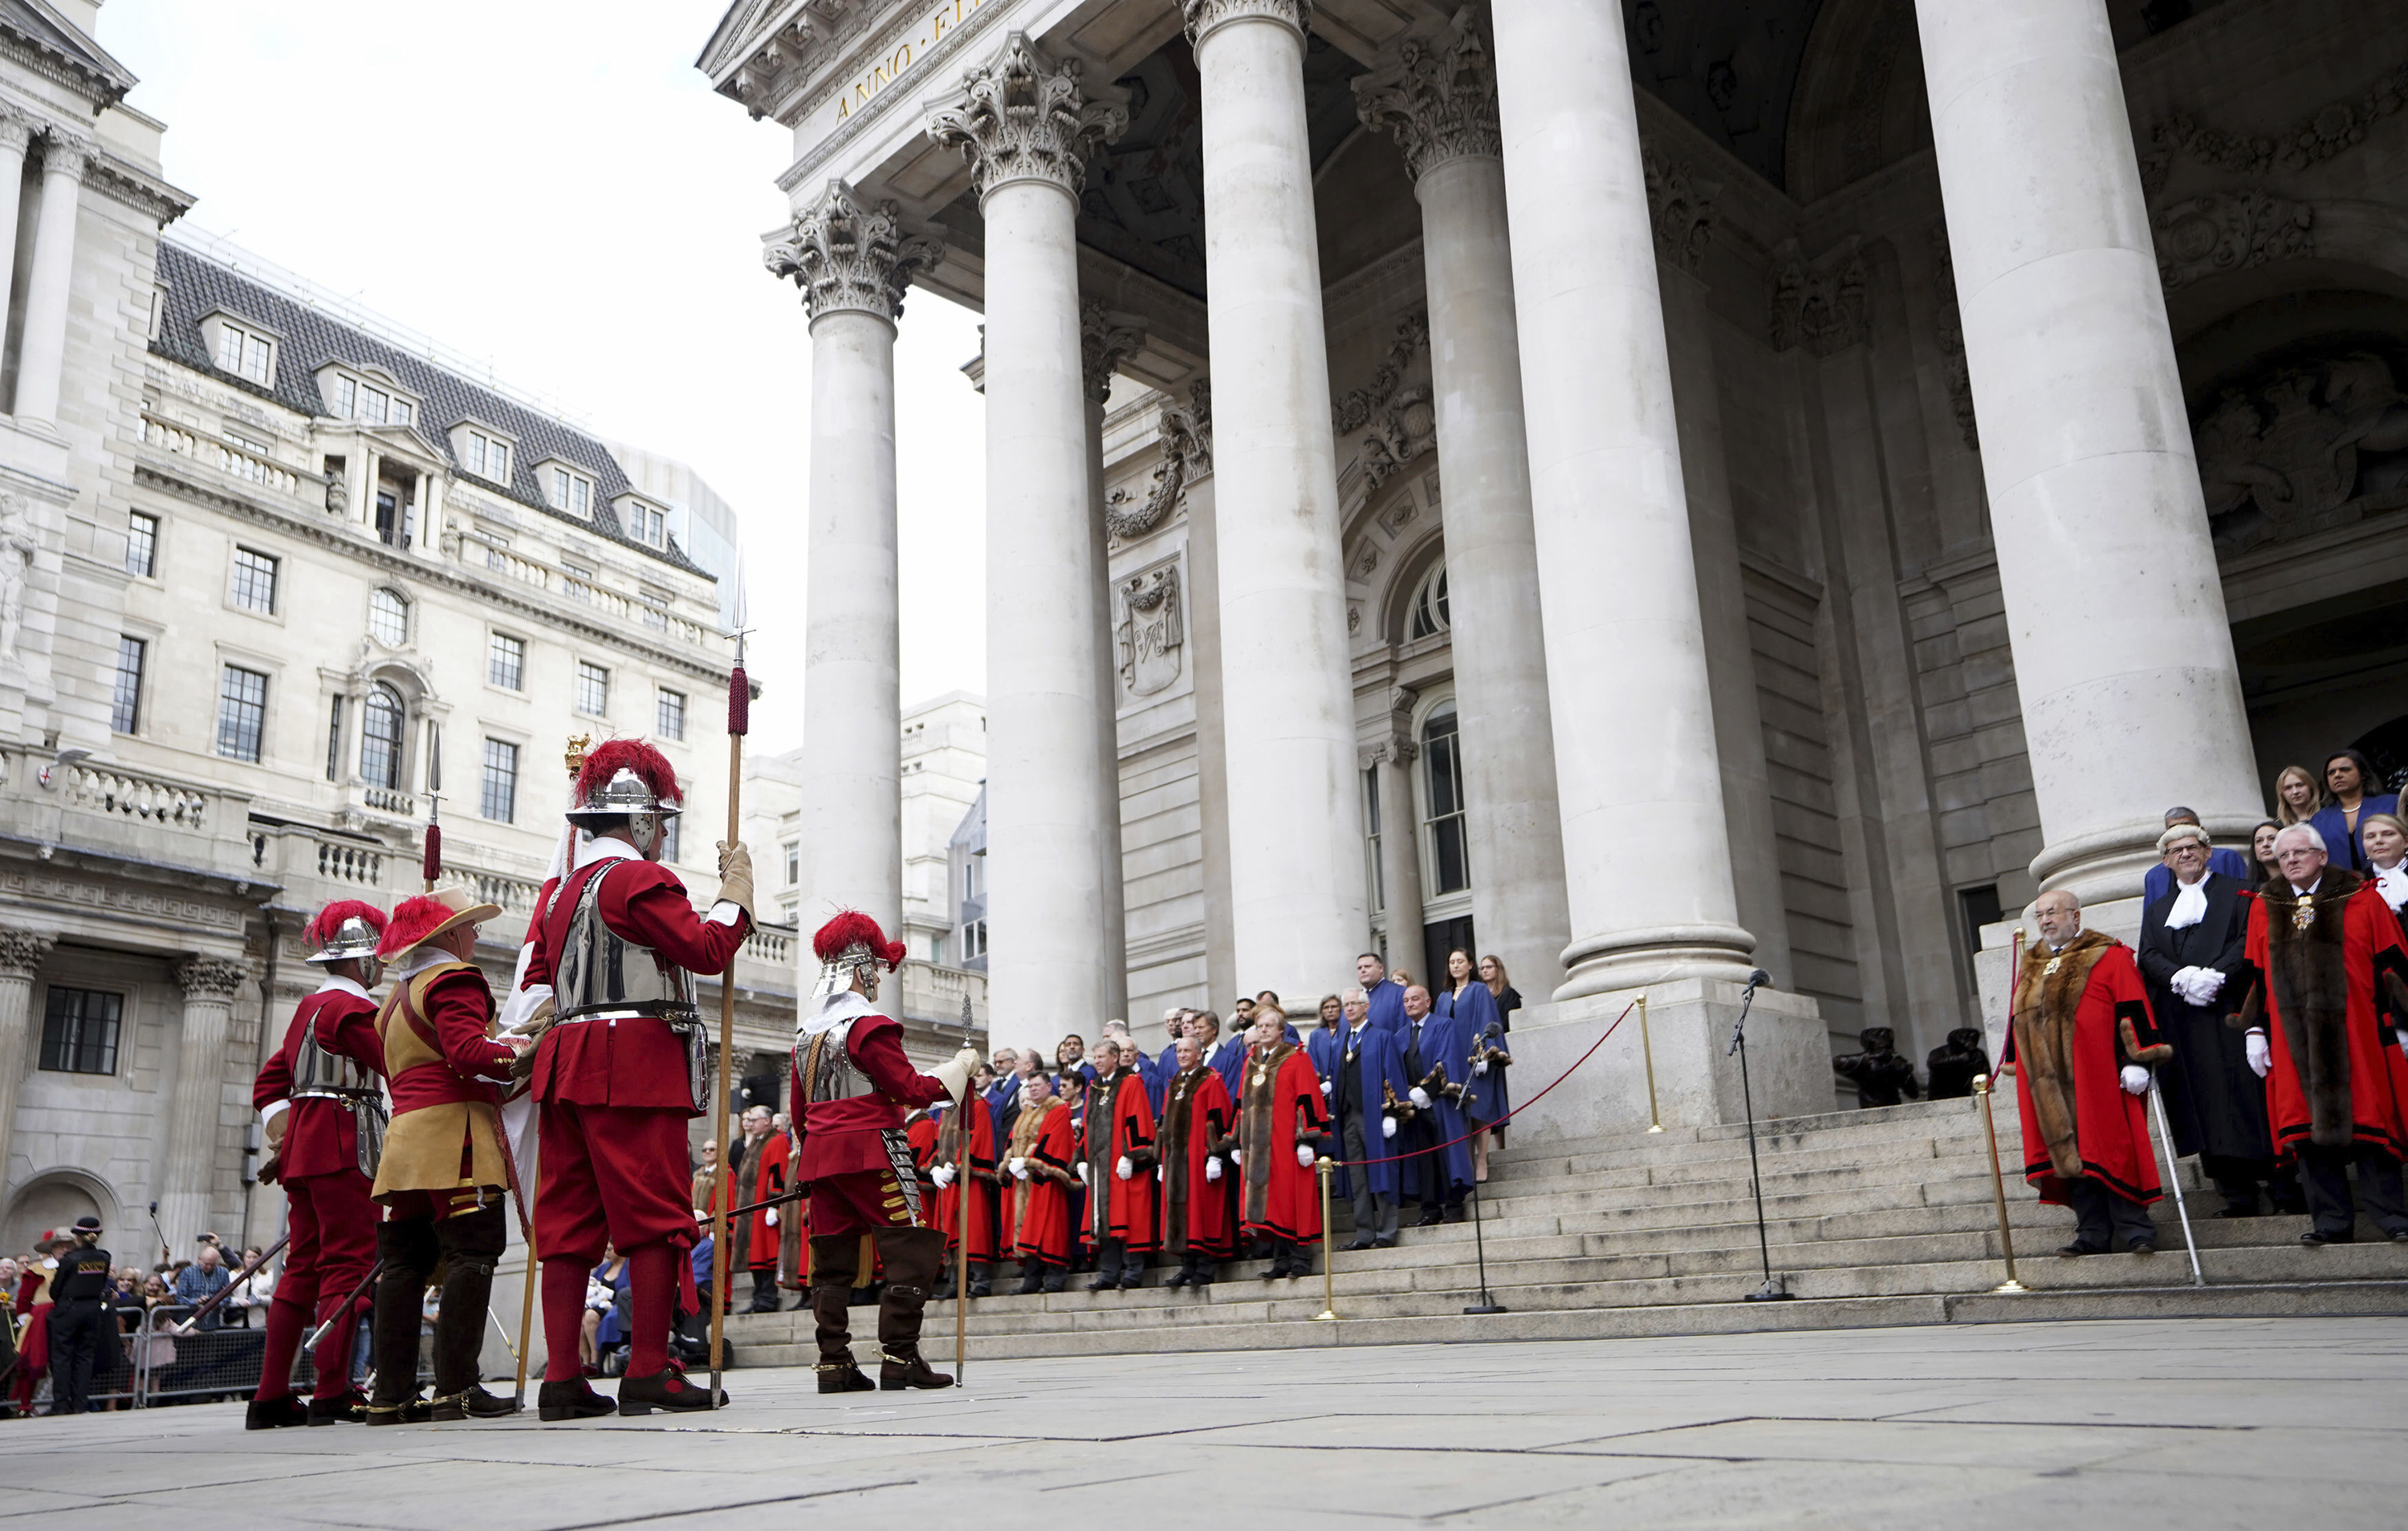 Pikemen of the Honourable Artillery Company, left, stand outside the Royal Exchange in the City of London, Saturday, September 10, before the reading of the Proclamation of Accession of King Charles III.